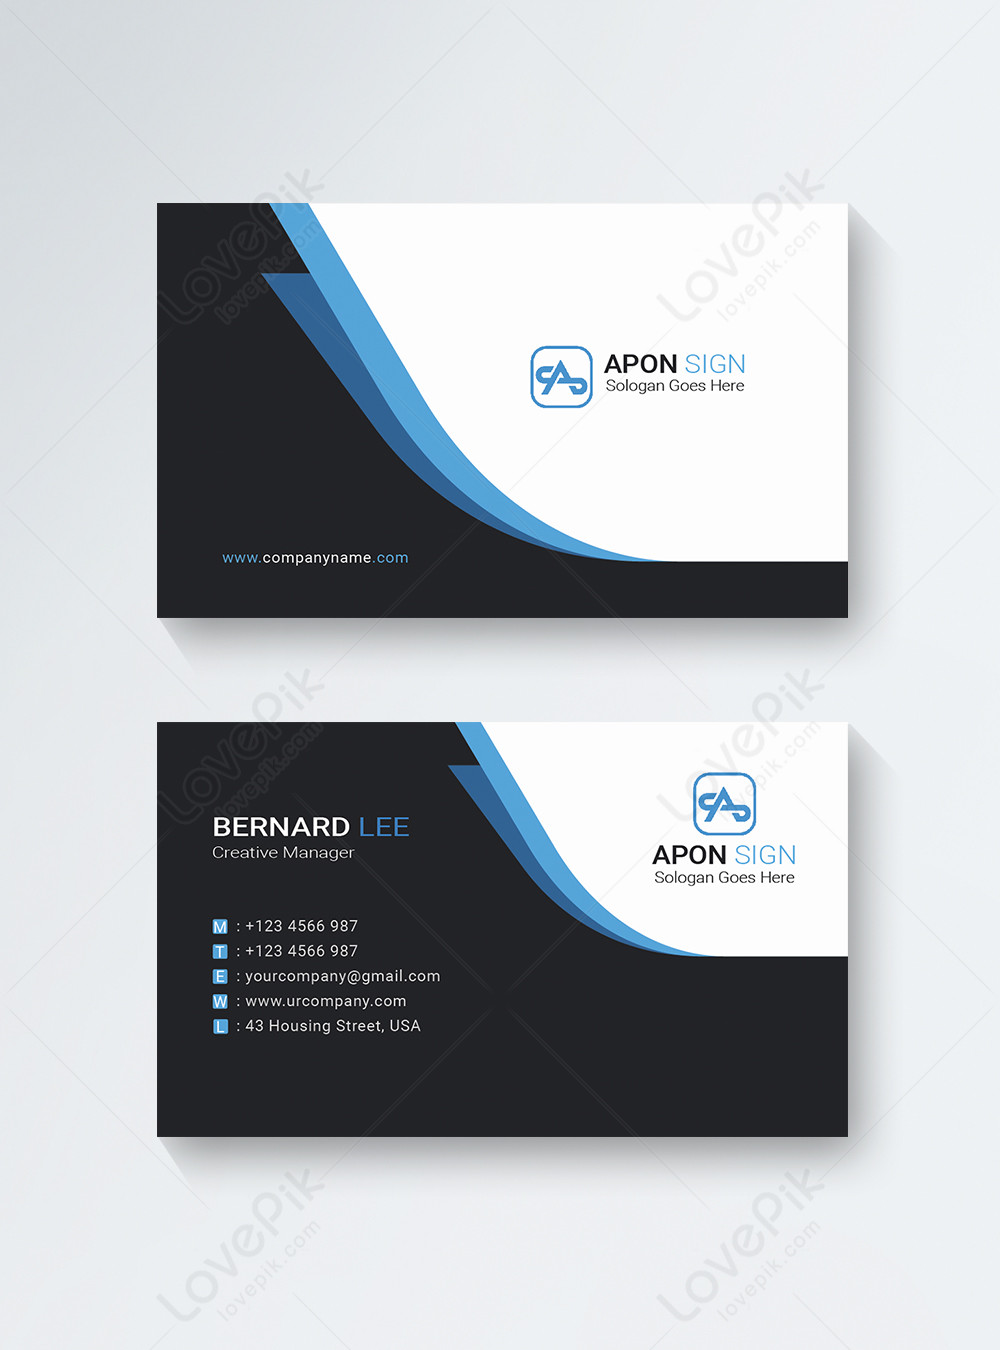 Professional business card template image_picture free download